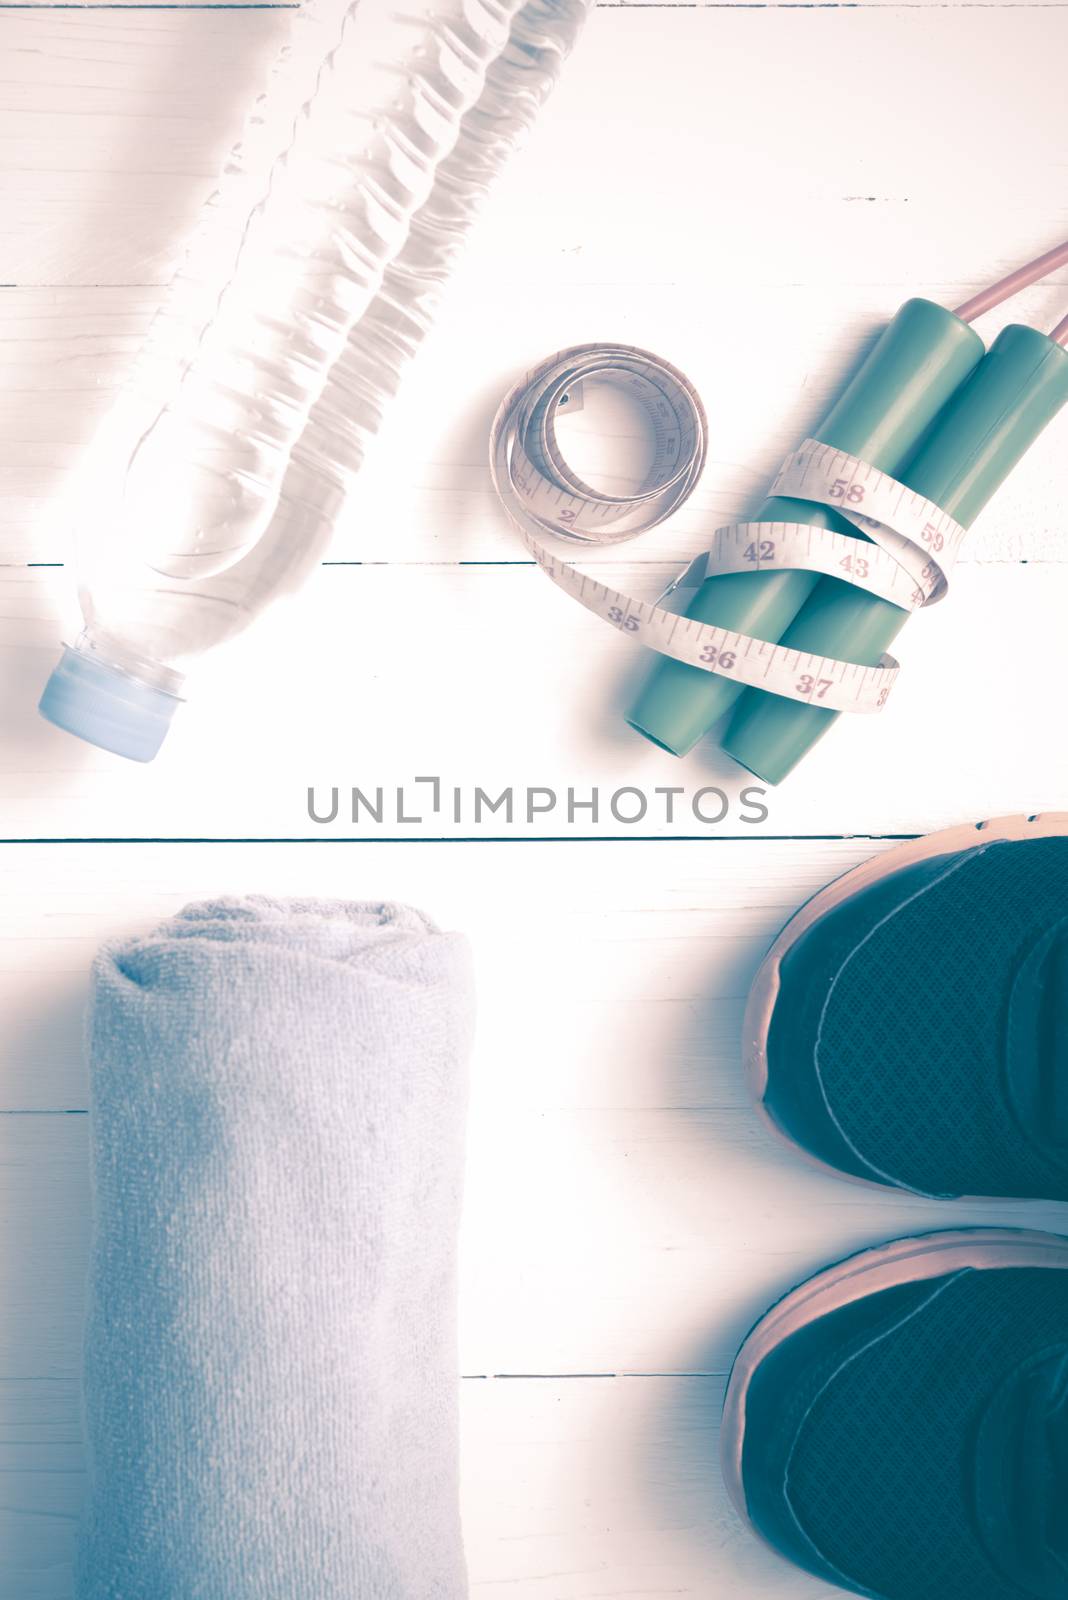 fitness equipment : running shoes,towel,jumping rope,water bottle and measuring tape on white wood table vintage style